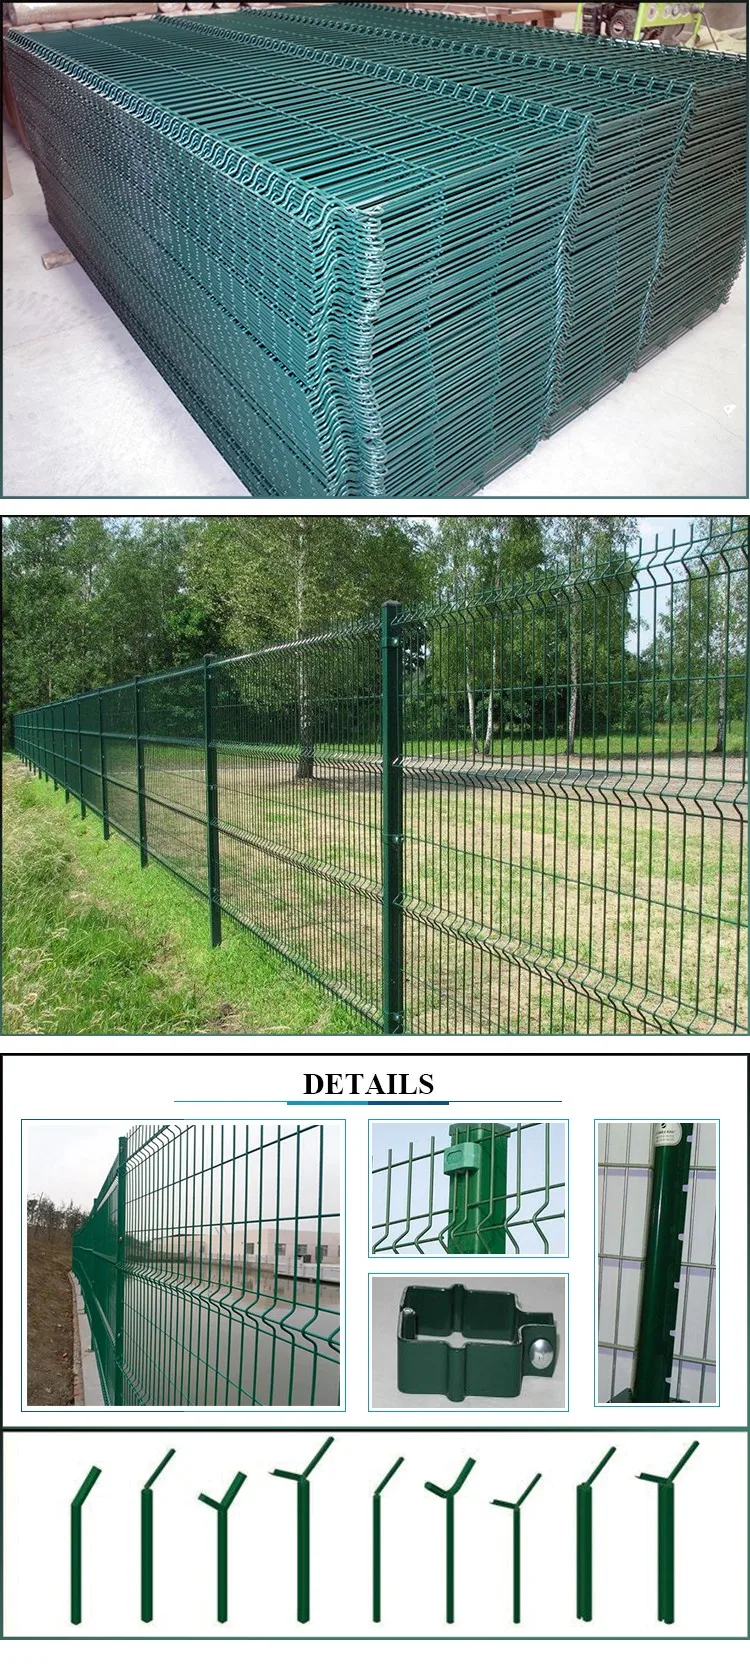 2x4 4x4 Welded Wire Mesh Fence